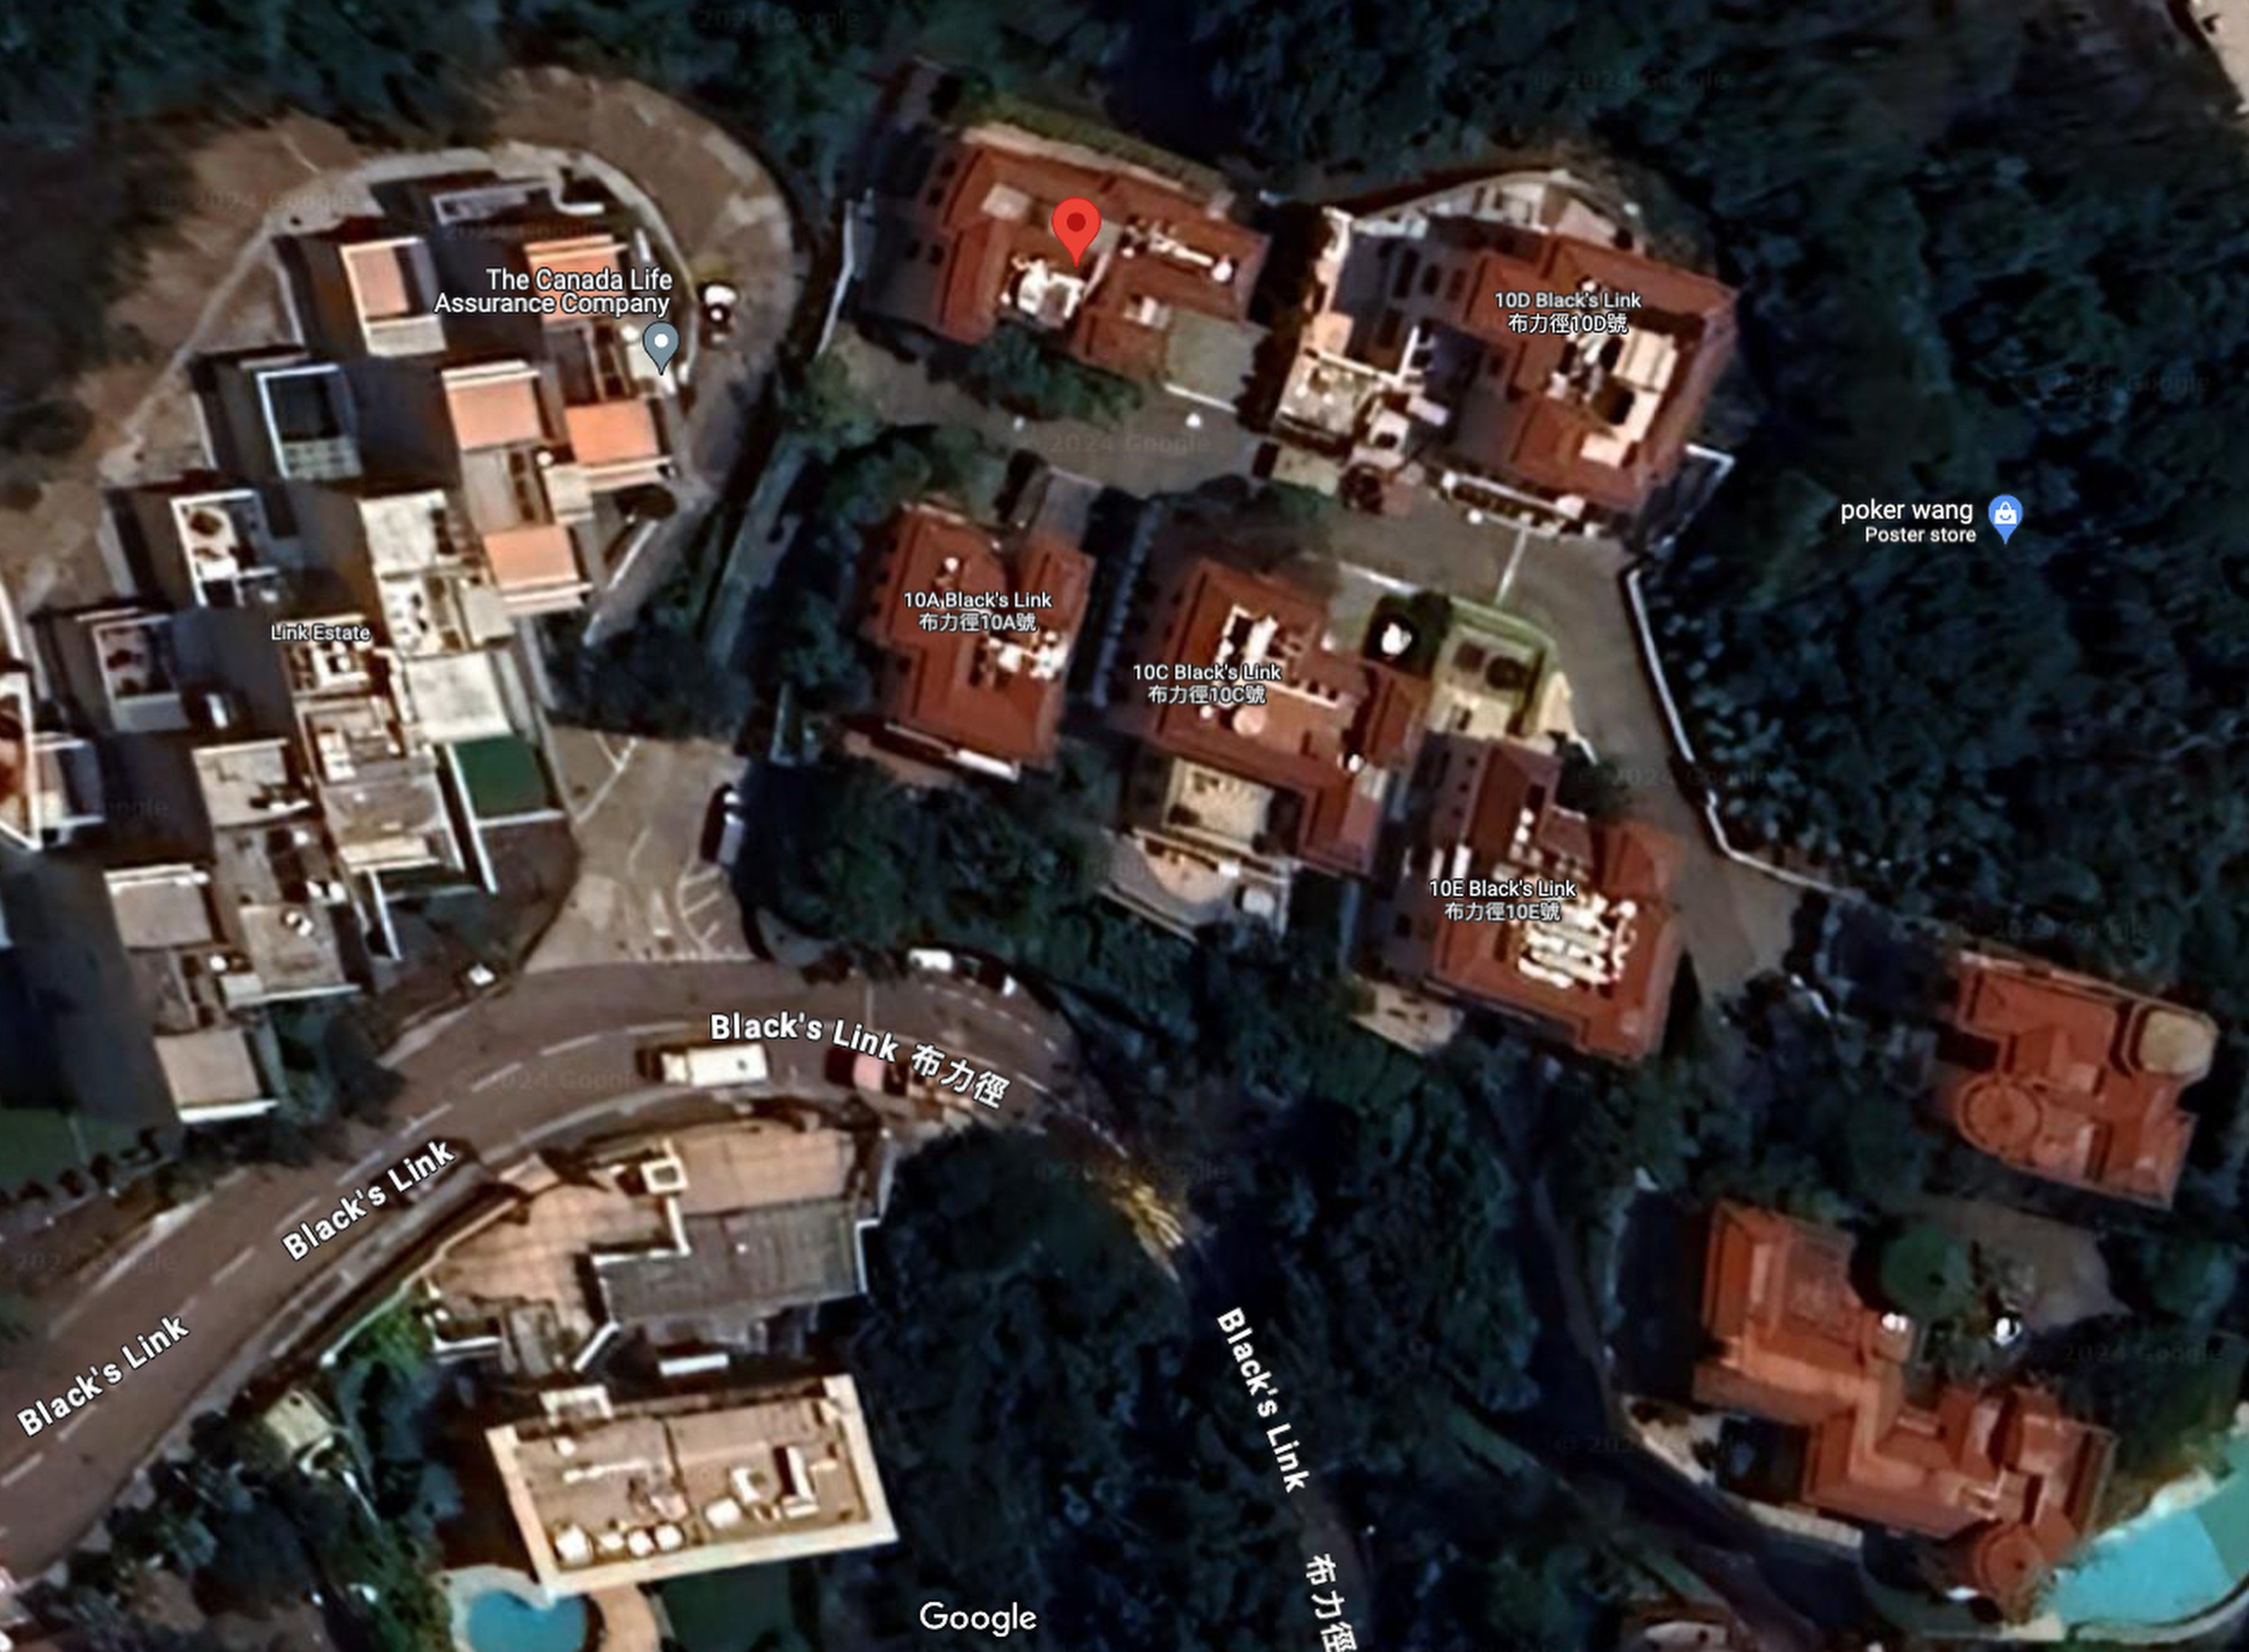 Luxury homes on Black’s Link on The Peak. Creditors have seized a few houses linked to Evergrande’s founder. Photo: Google